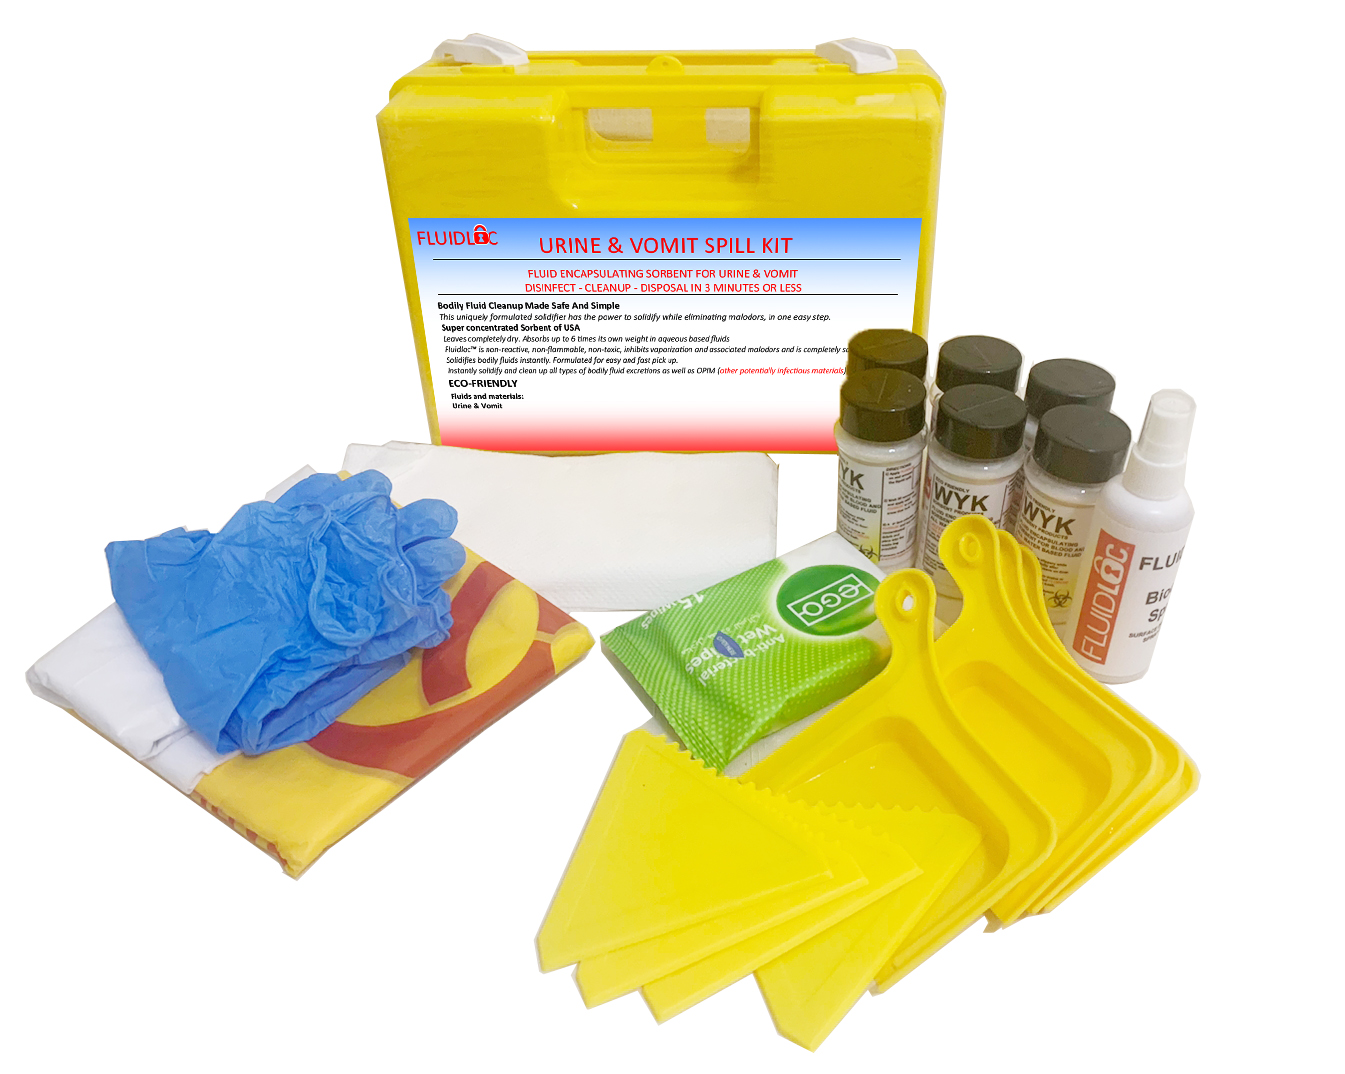  Types of Industrial Spill Kits:  A Comprehensive Overview